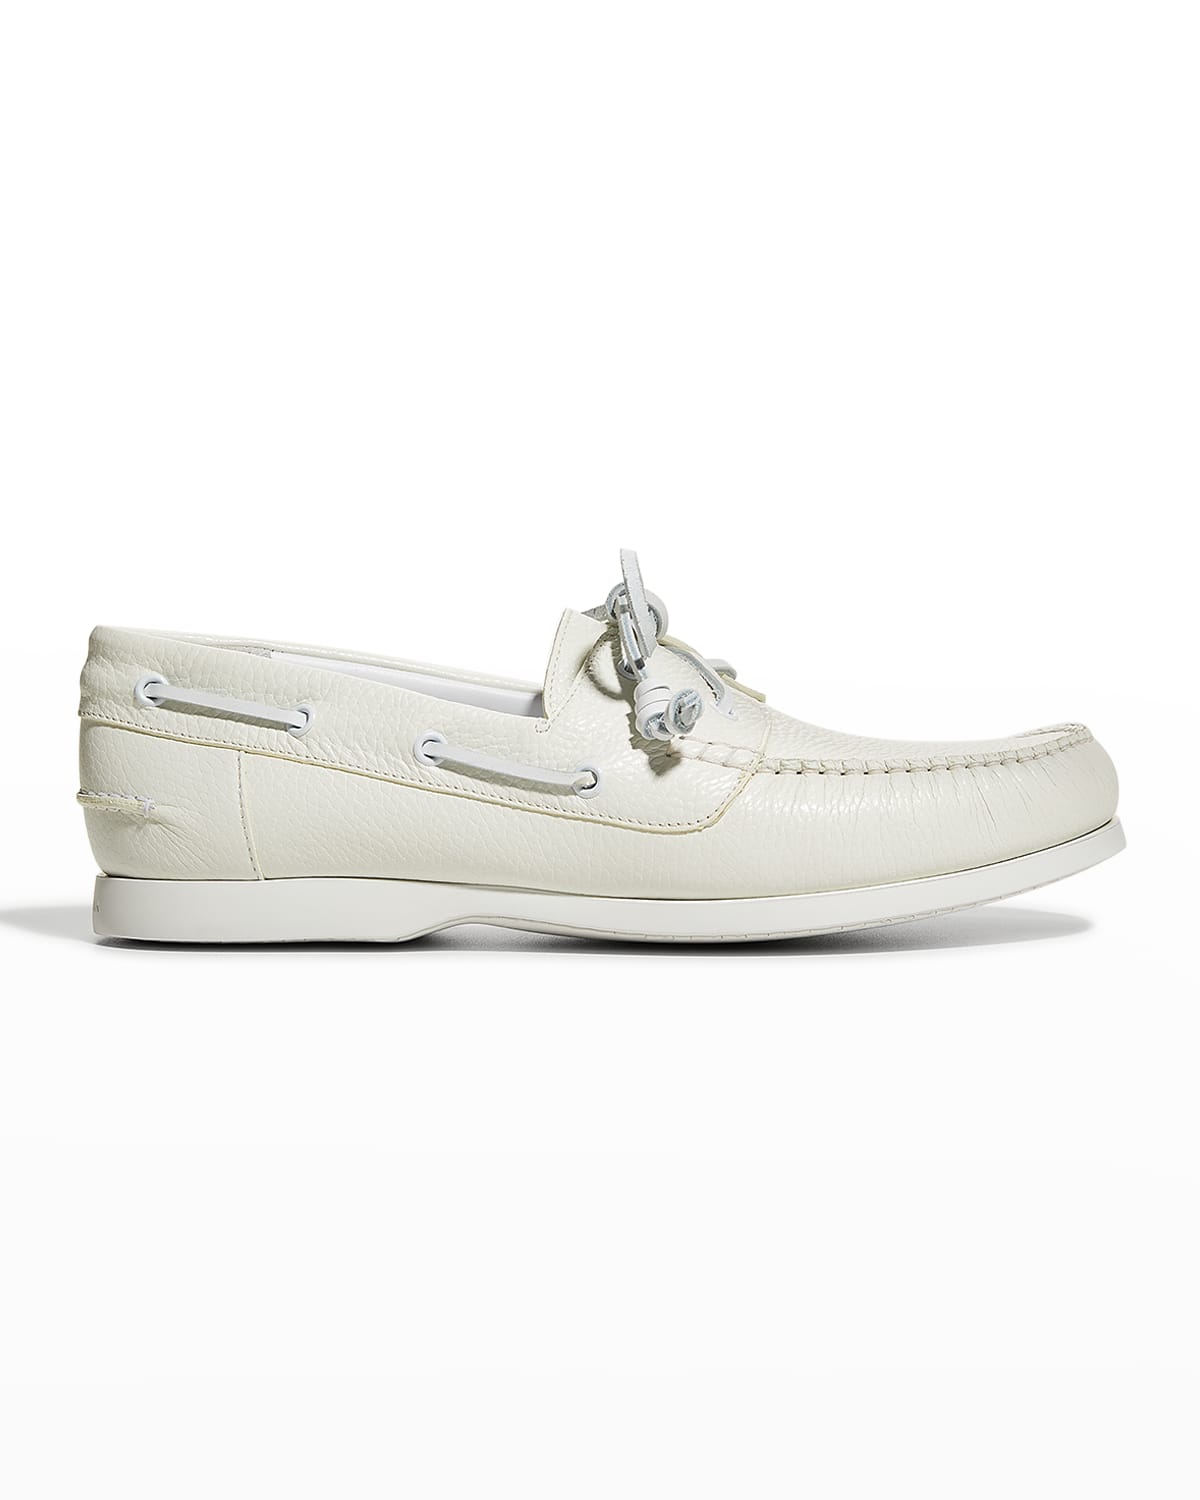 Men's Sidmouth Leather Boat Shoes